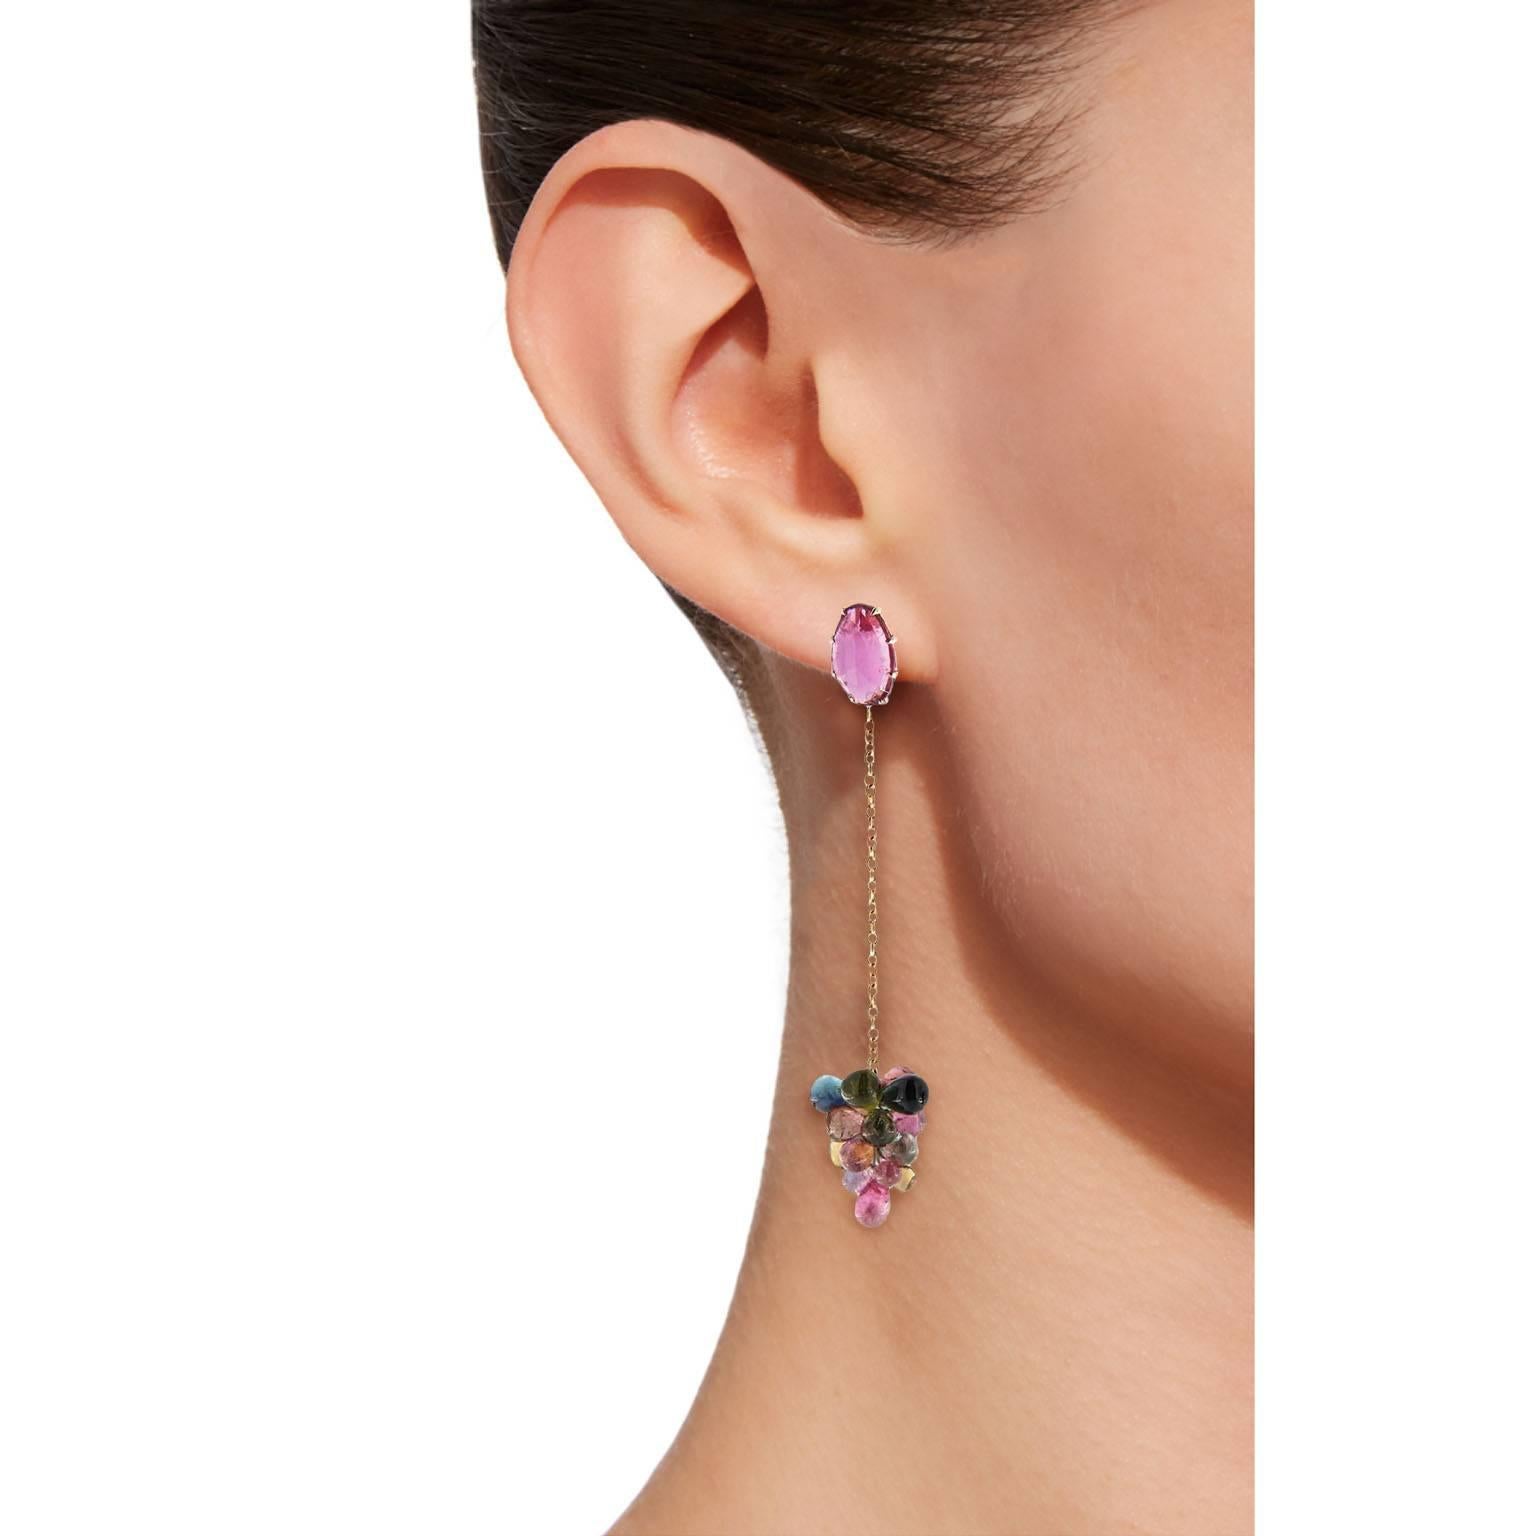 Jona design collection, hand crafted in Italy, beautiful cluster of natural multicolor tourmaline cabochon cut drops weighing 24.85 carats, suspending from two pebble cut Rubellite Tourmalines, weighing 3.22 carats in total, mounted in 18k yellow